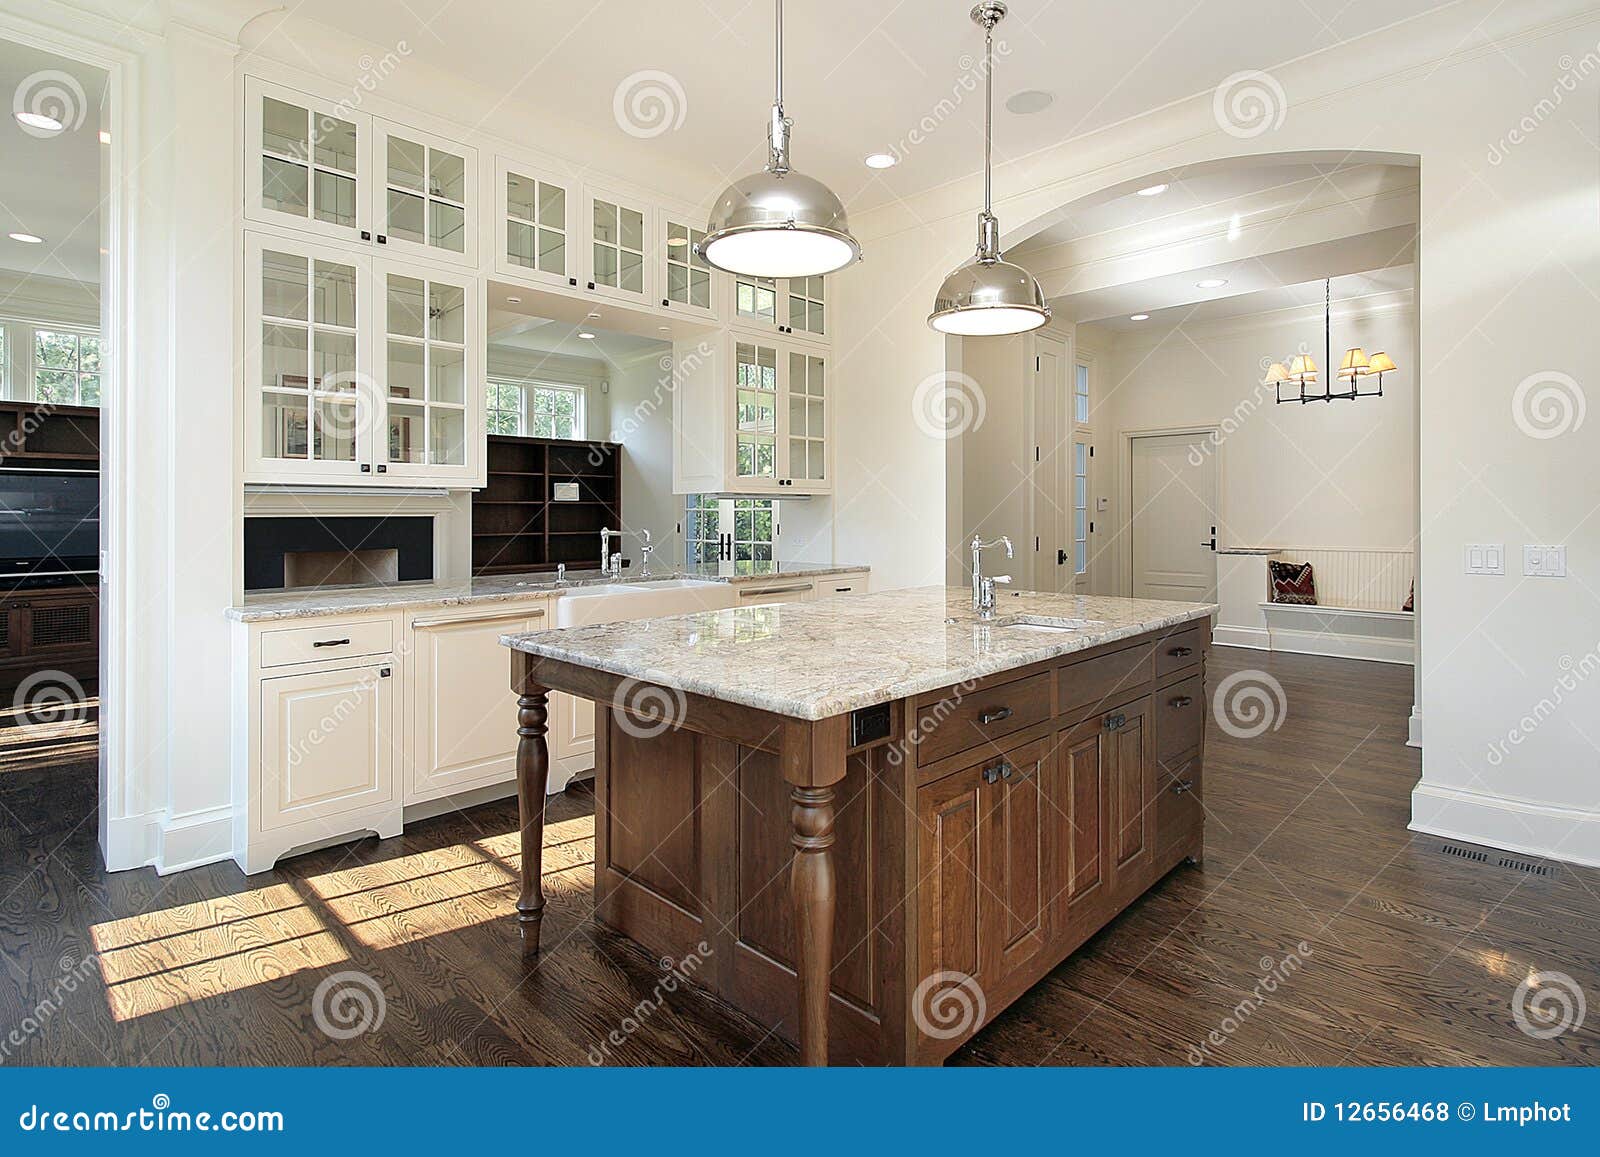 Kitchen With White Wood Cabinetry Stock Photo - Image of home, counter